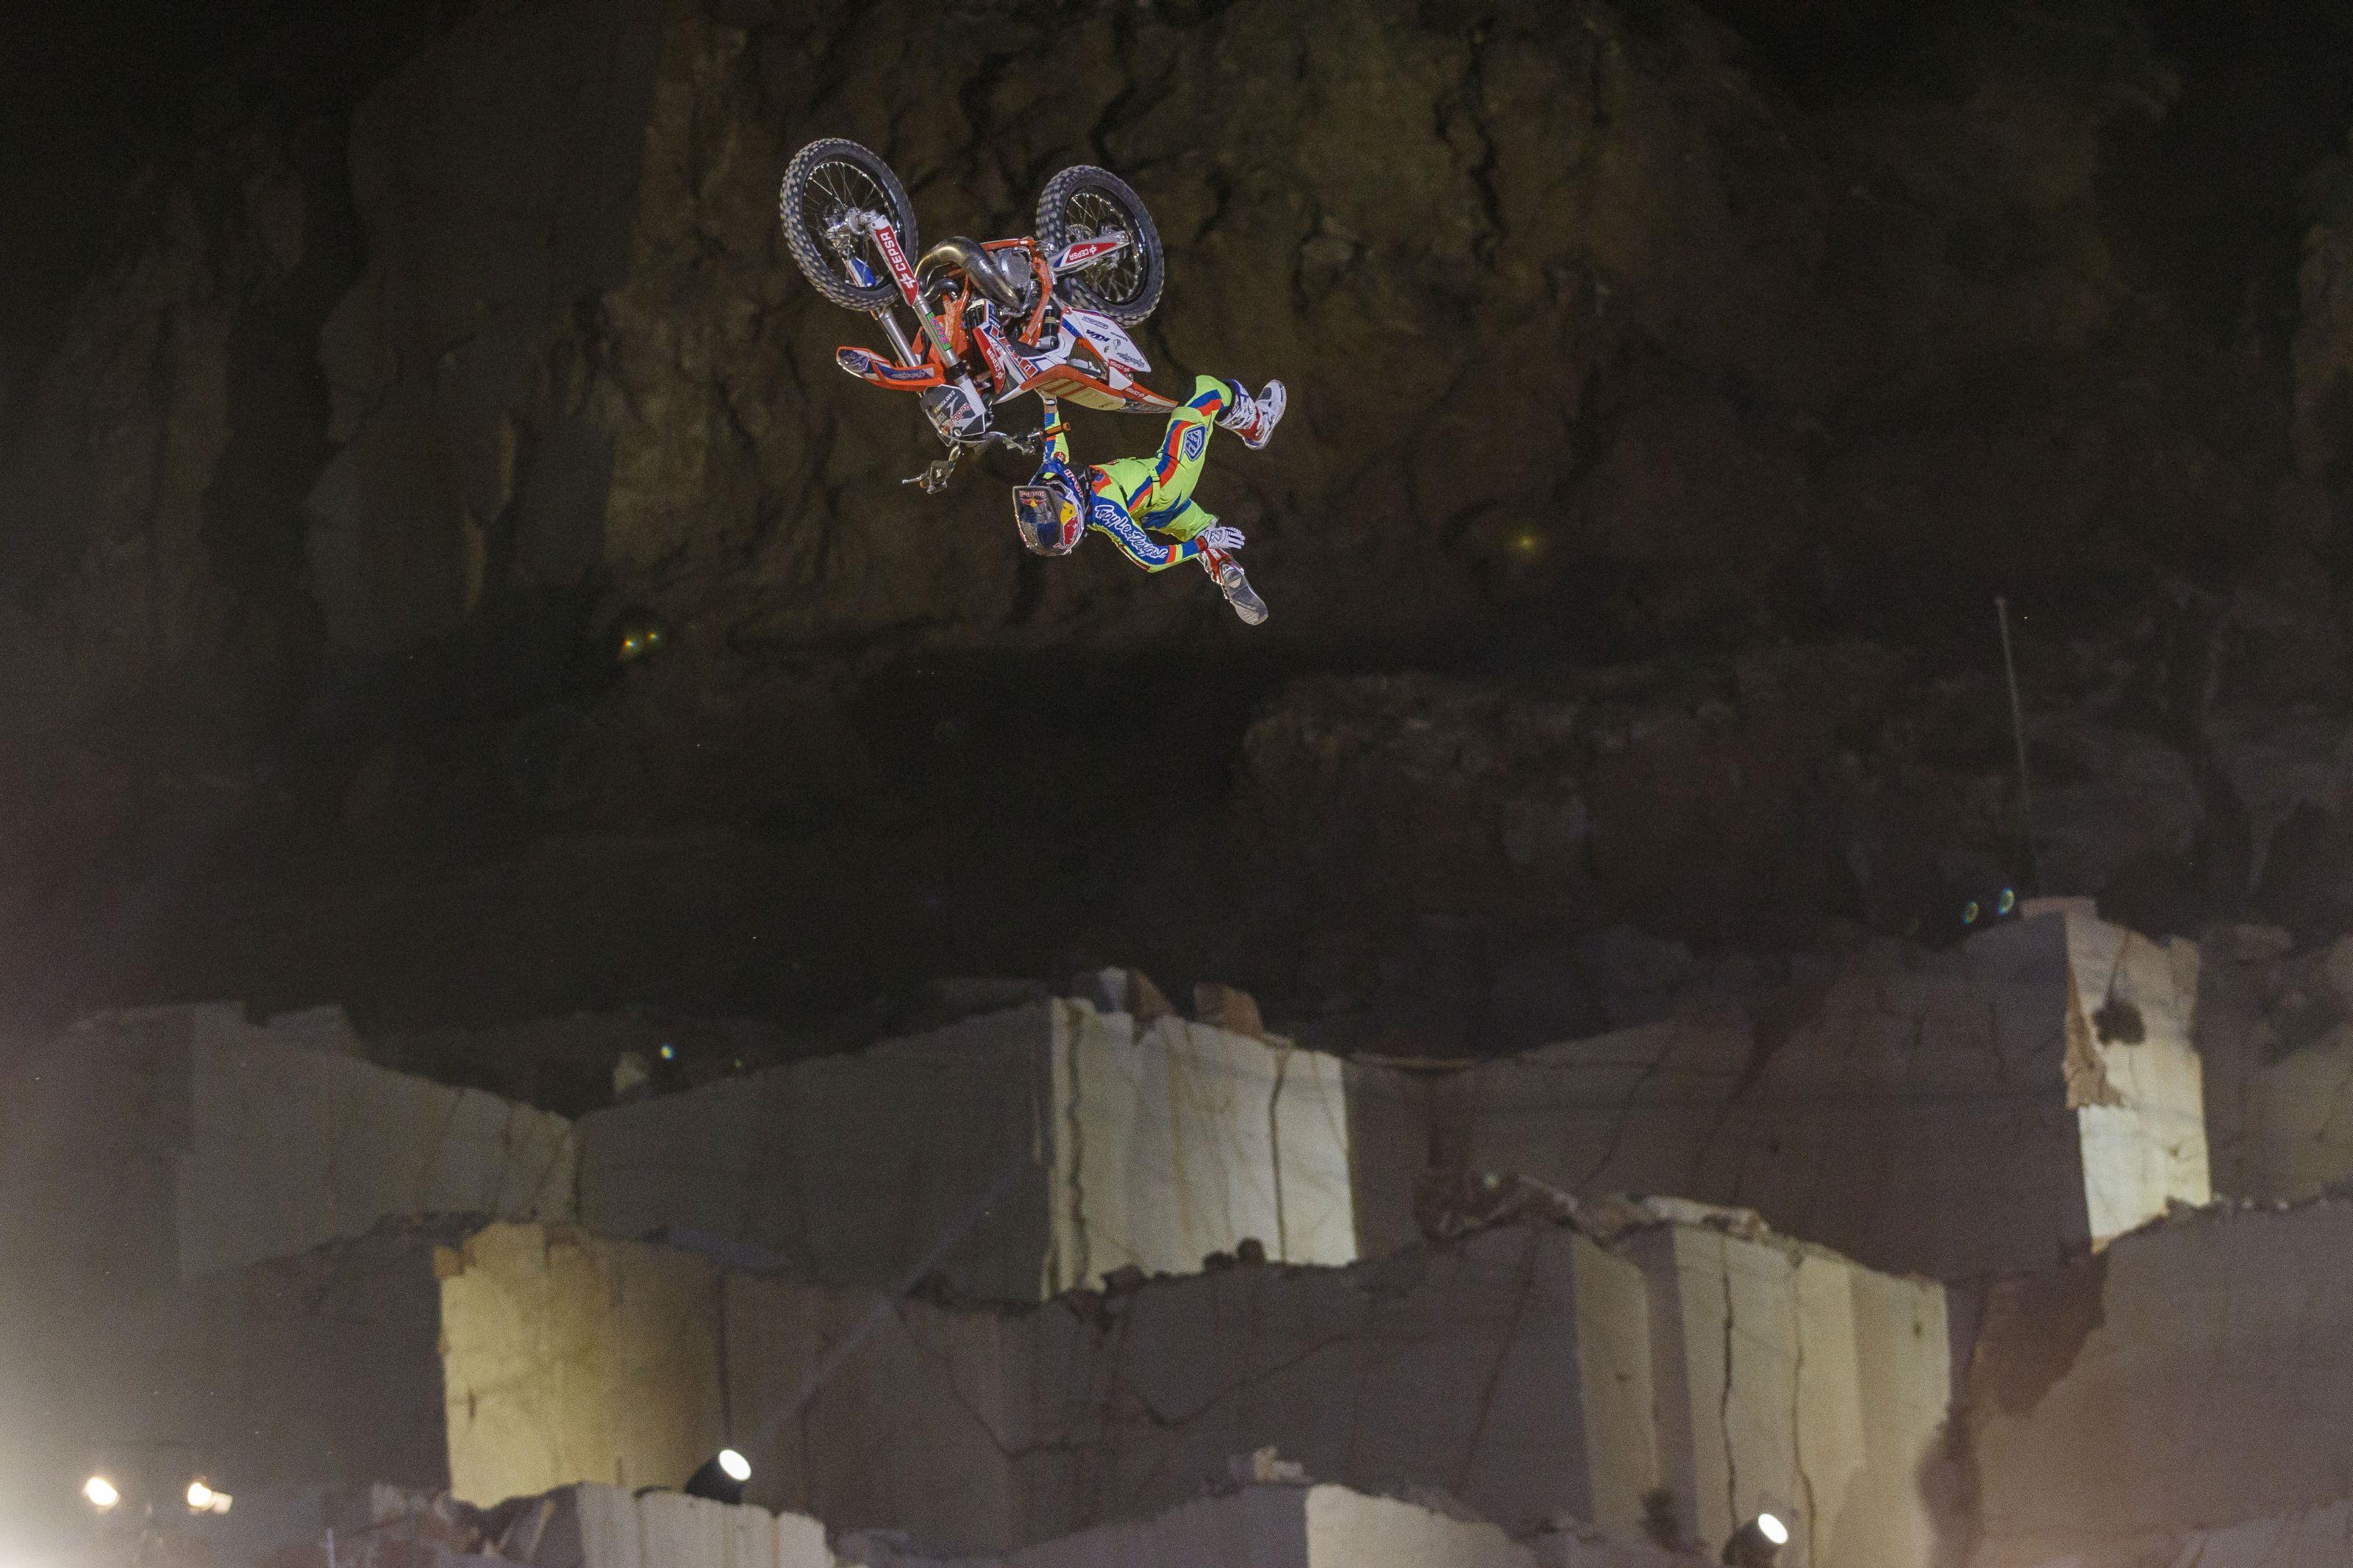 Red Bull X-Fighters Freestyle Motocross Παγκόσμιο Πρωτάθλημα 2015 